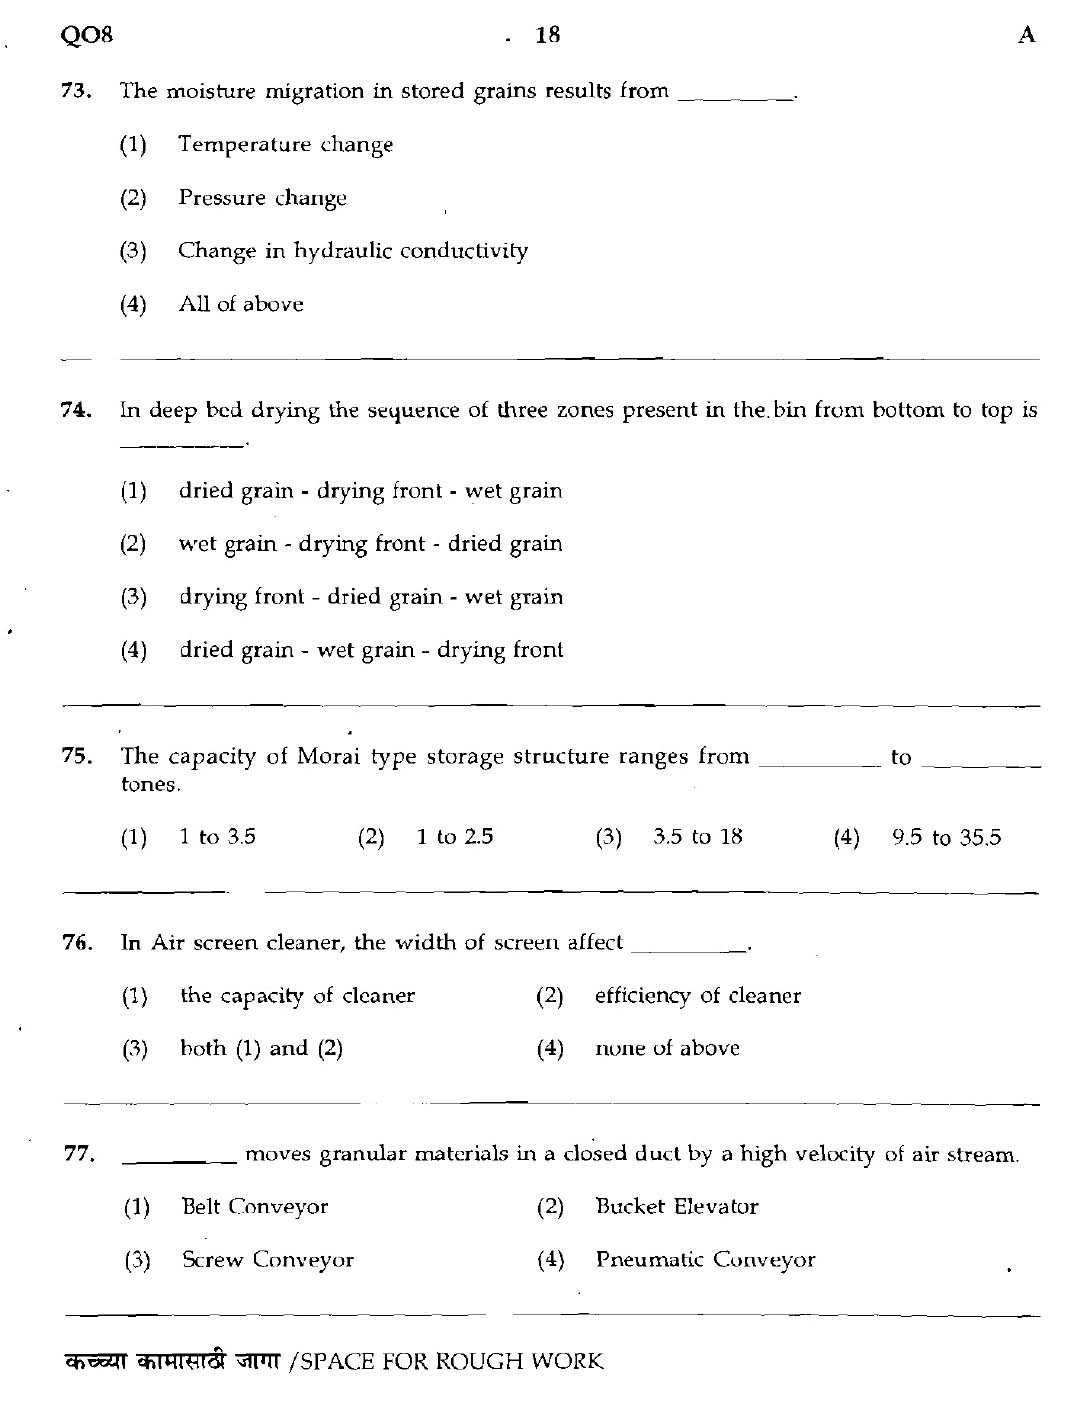 MPSC Agricultural Services Main Exam 2016 Question Paper 1 Agricultural Science 17